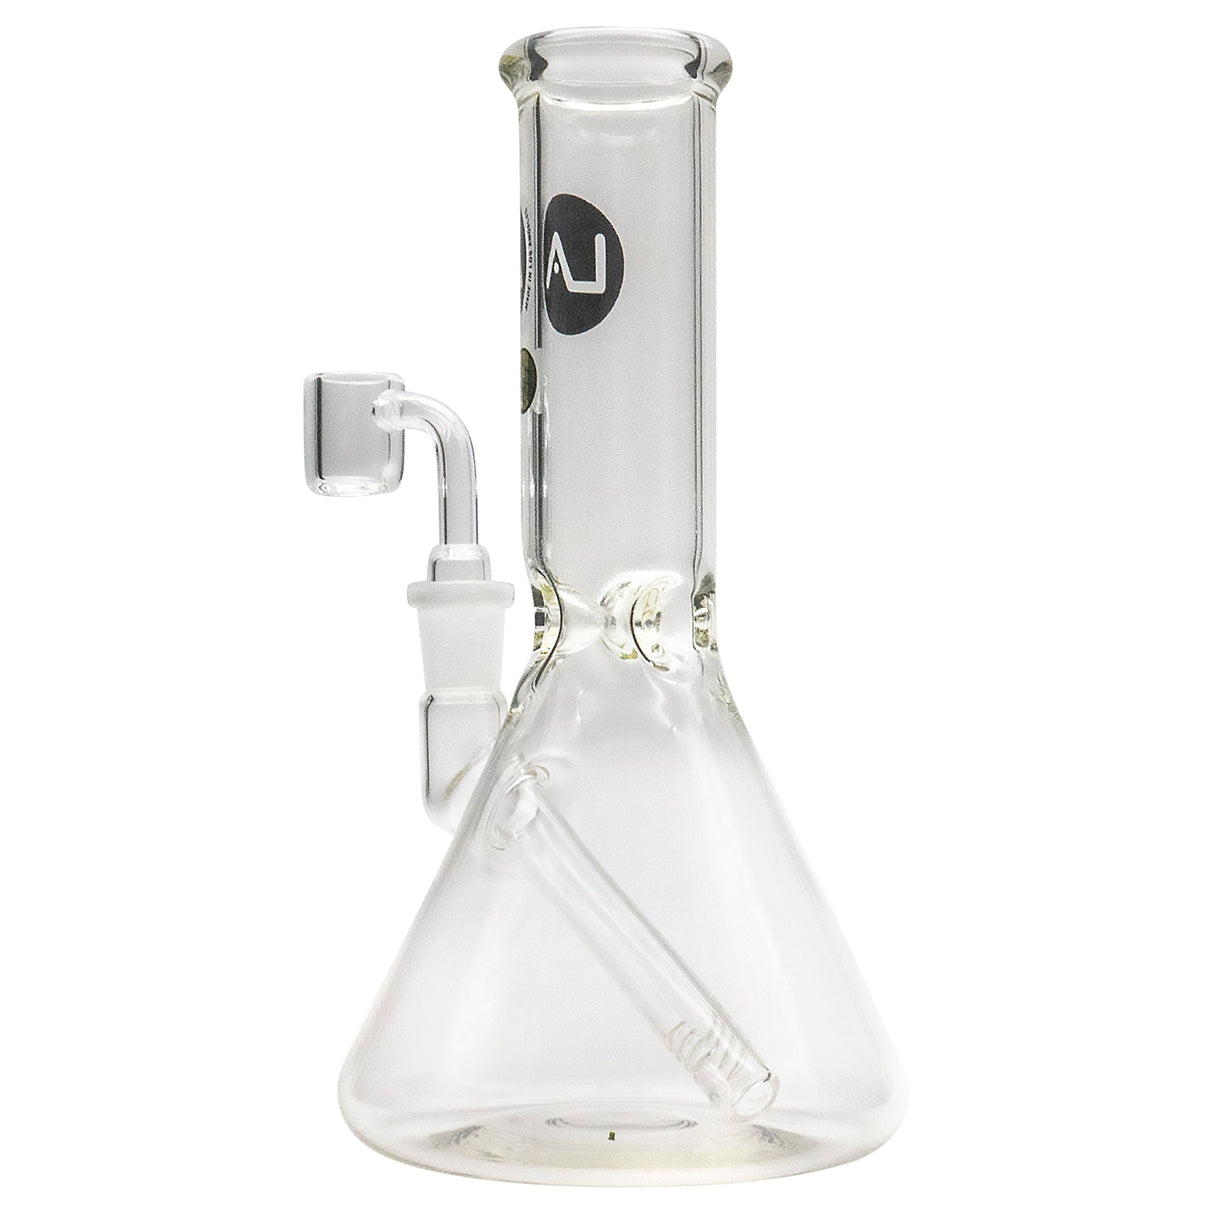 LA Pipes Classic Beaker Concentrate Rig with Quartz Banger Front View